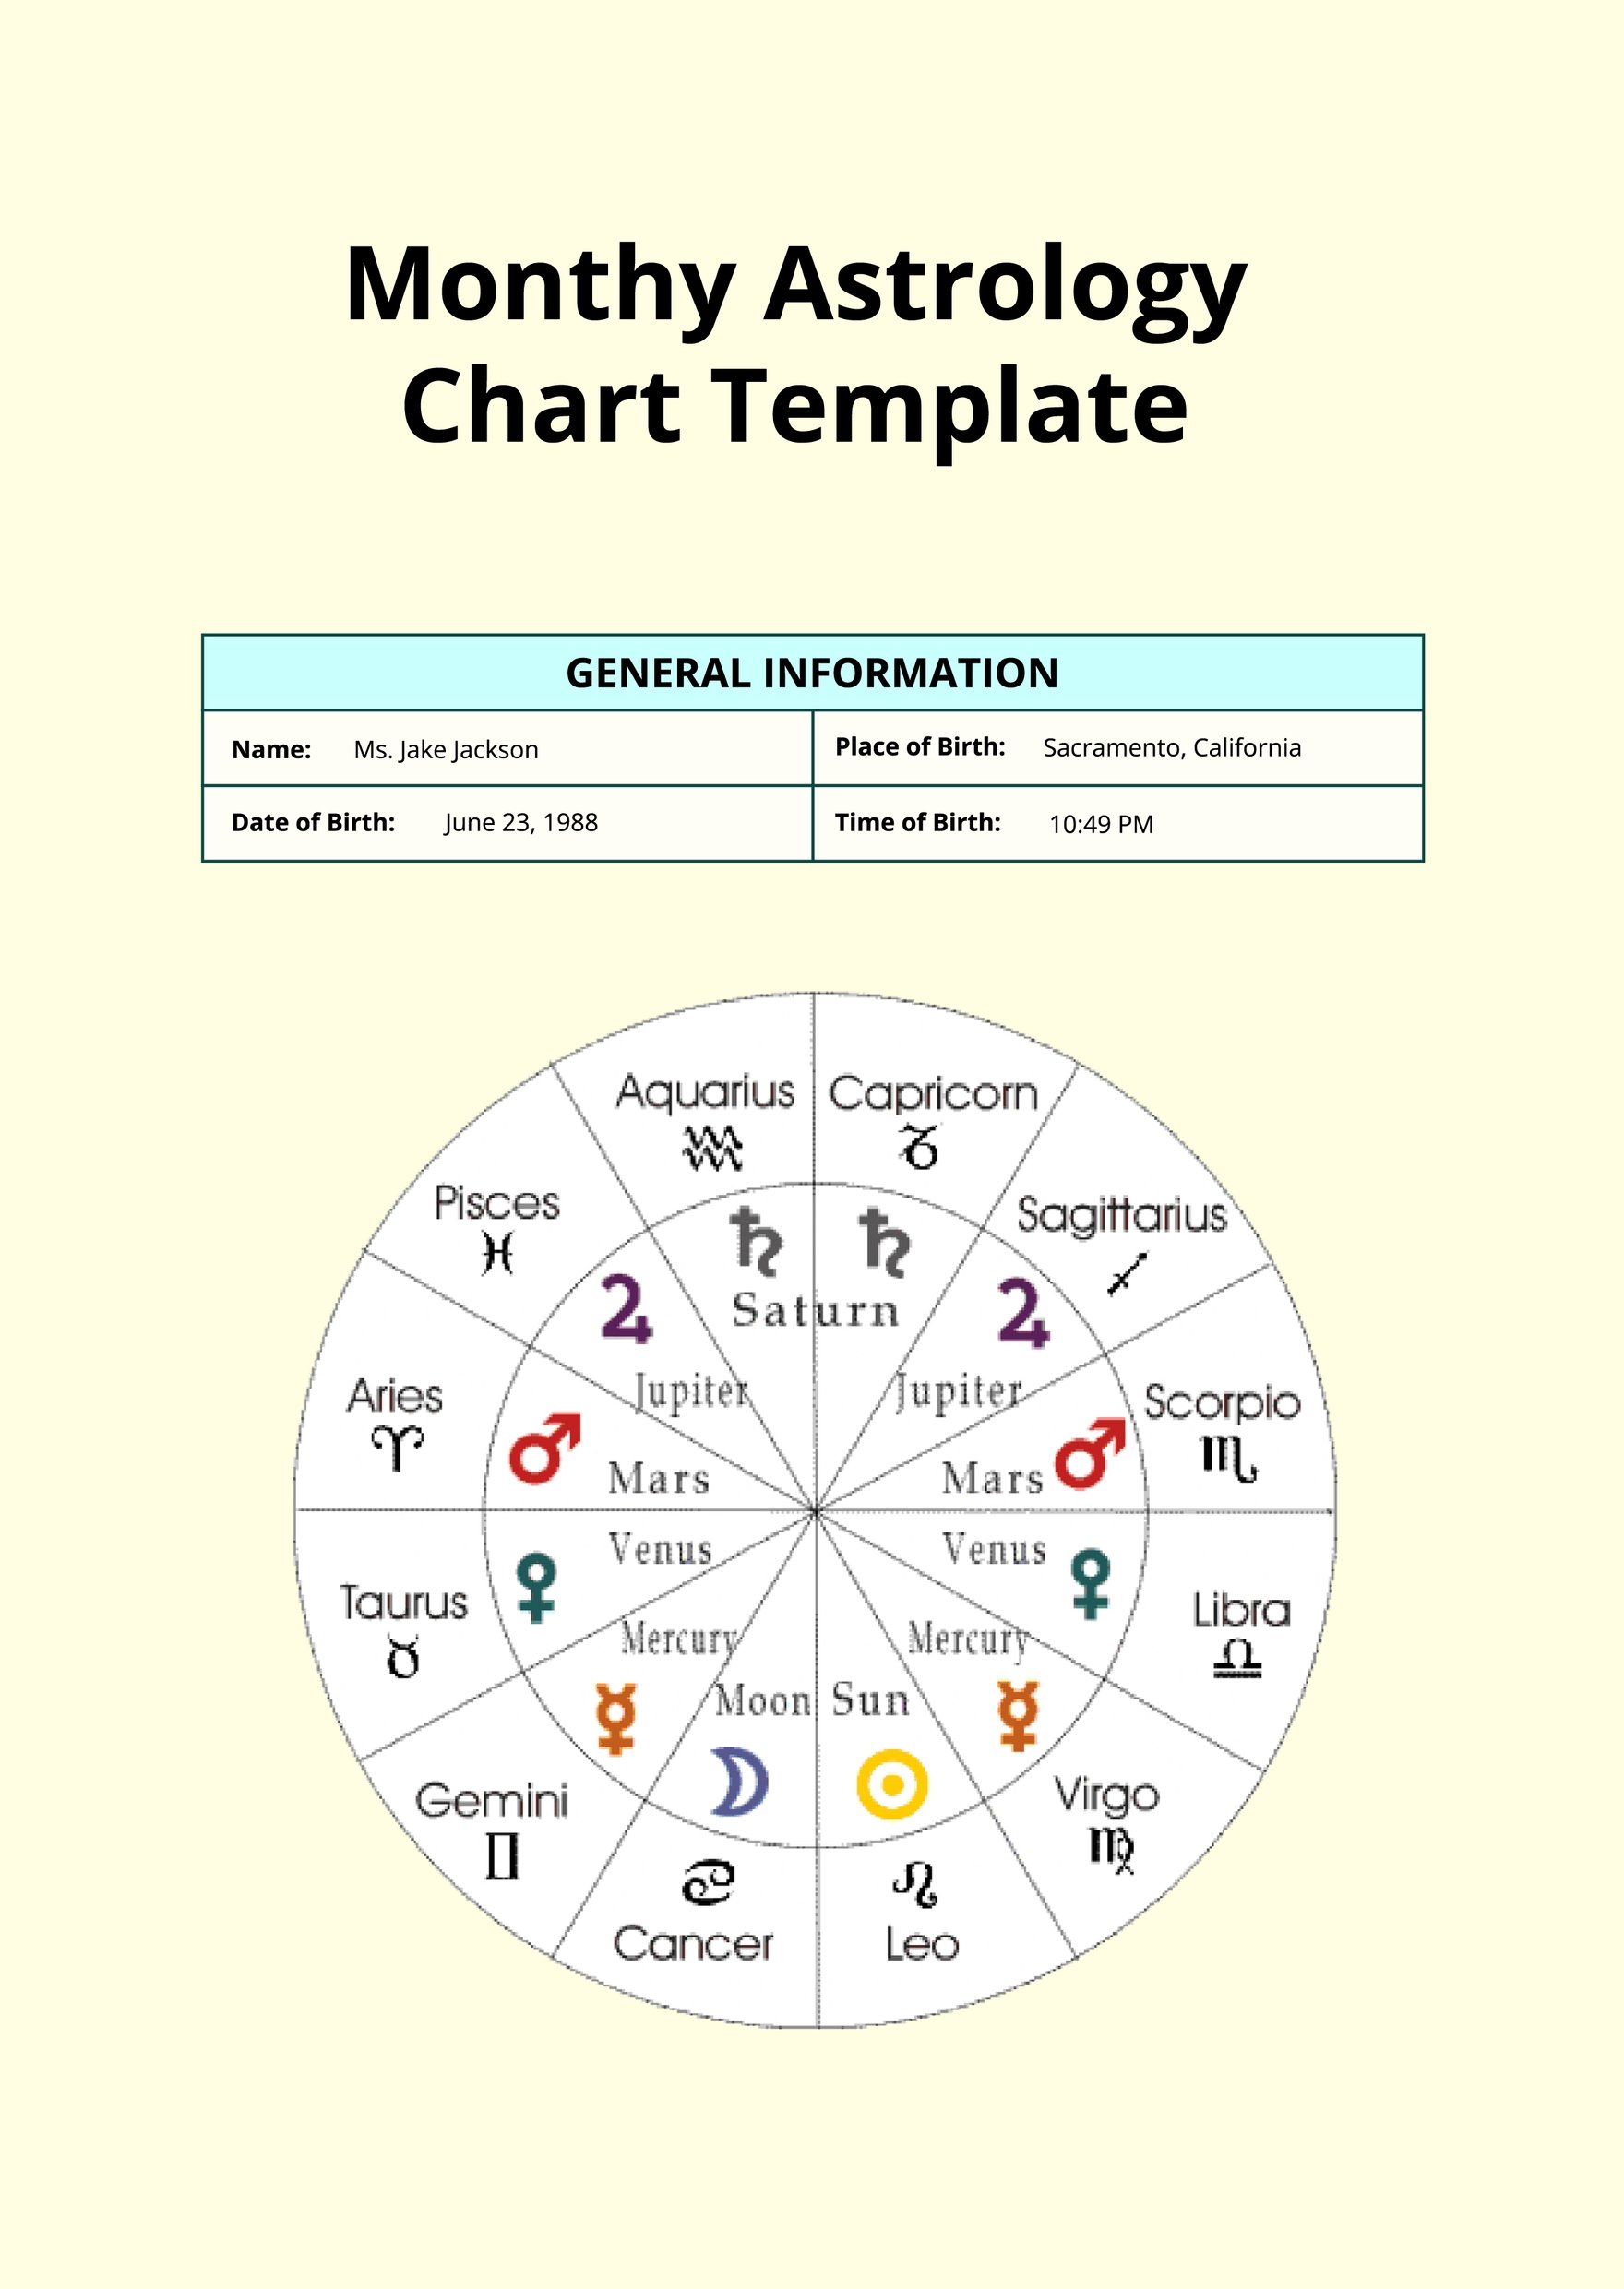 Monthy Astrology Chart Template